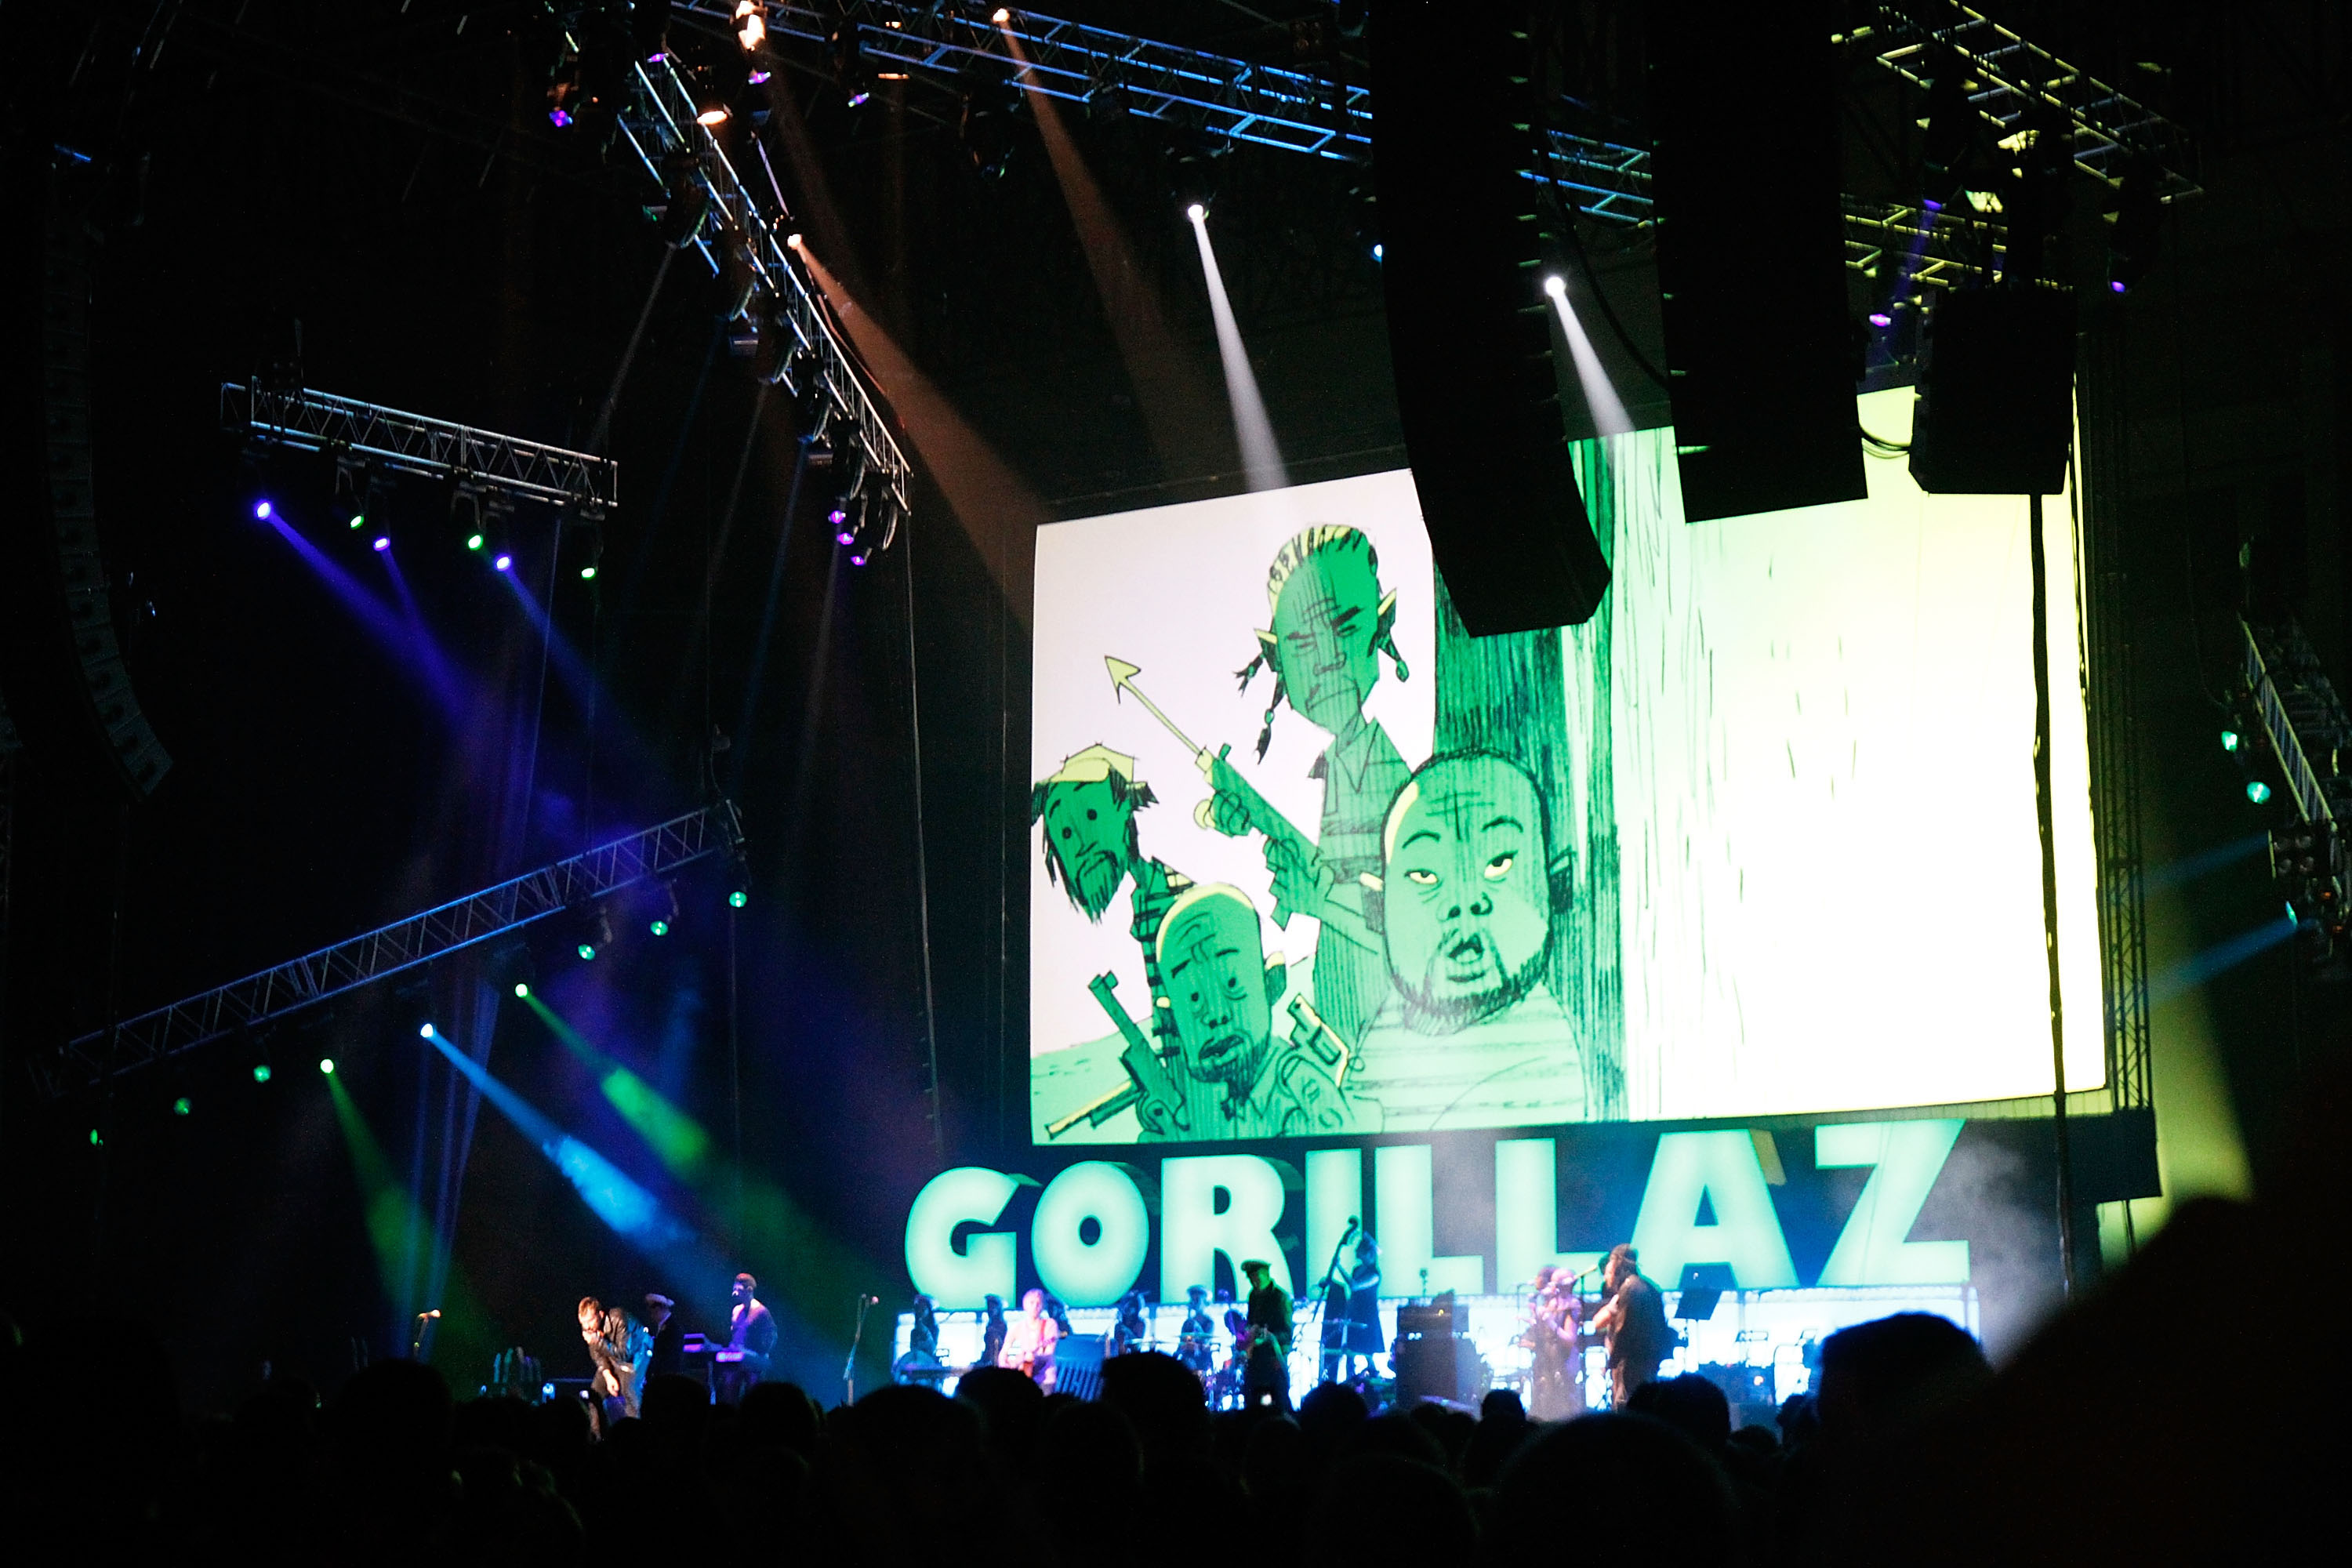 The Gorillaz performs on stage at The Burswood Dome on Dec. 6, 2010 in Perth, Australia. (Matt Jelonek—WireImage/Getty Images)